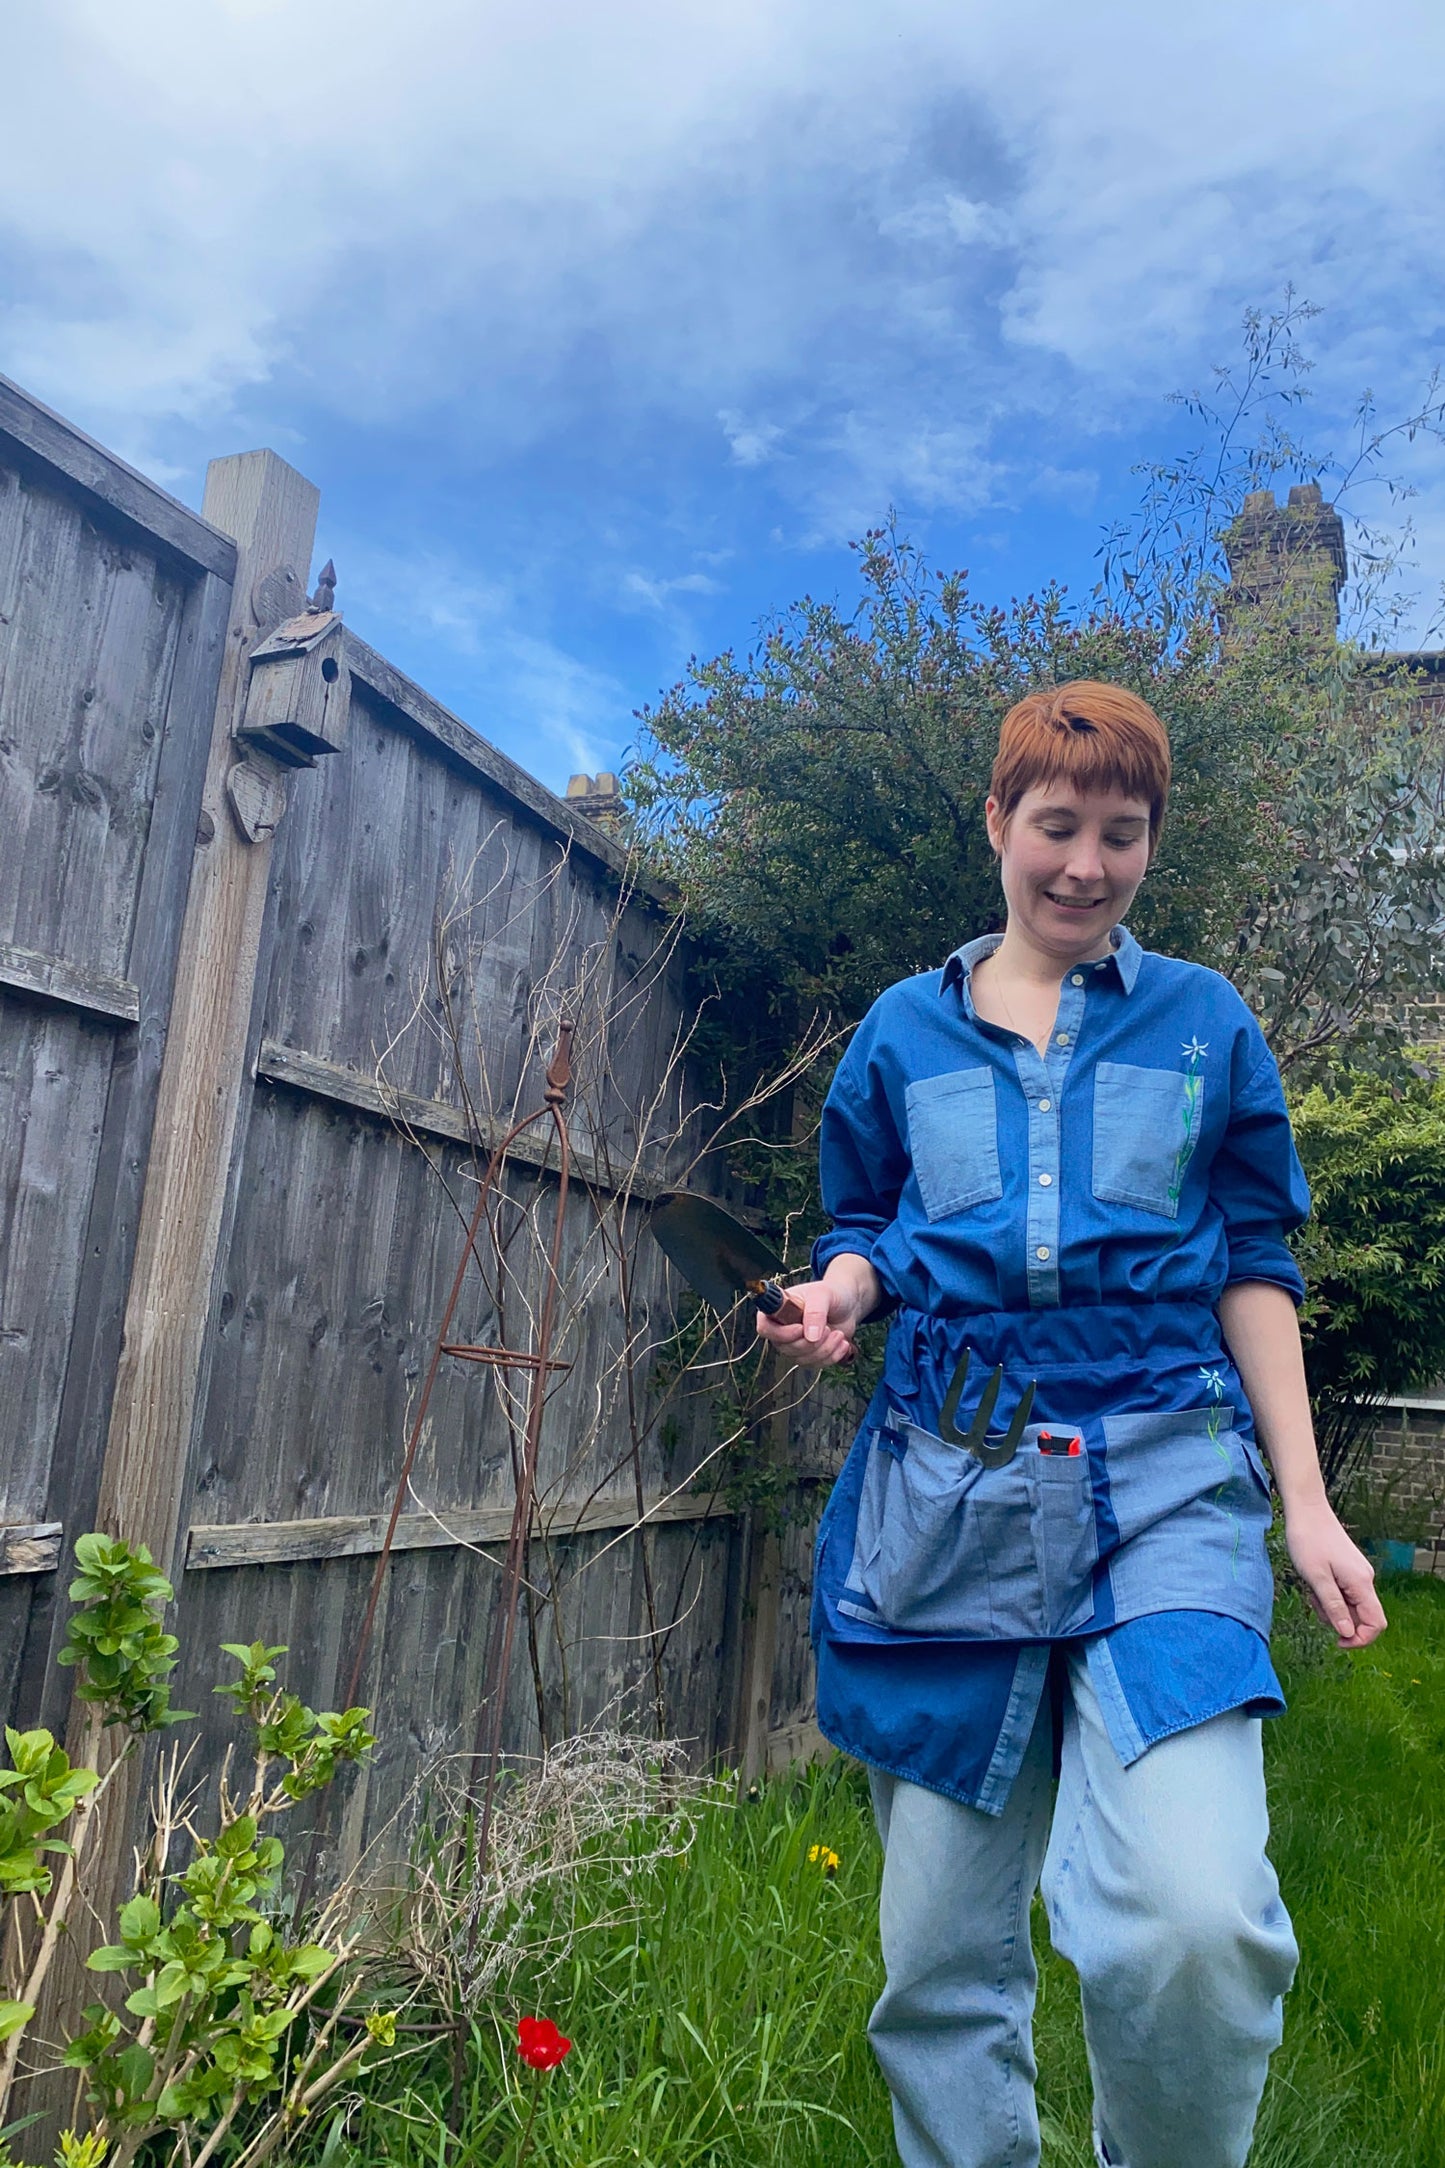 Tool Belt made in Japanese Denim, for the garden or multifunctional, by Saywood. Woman wears the tool belt in the garden